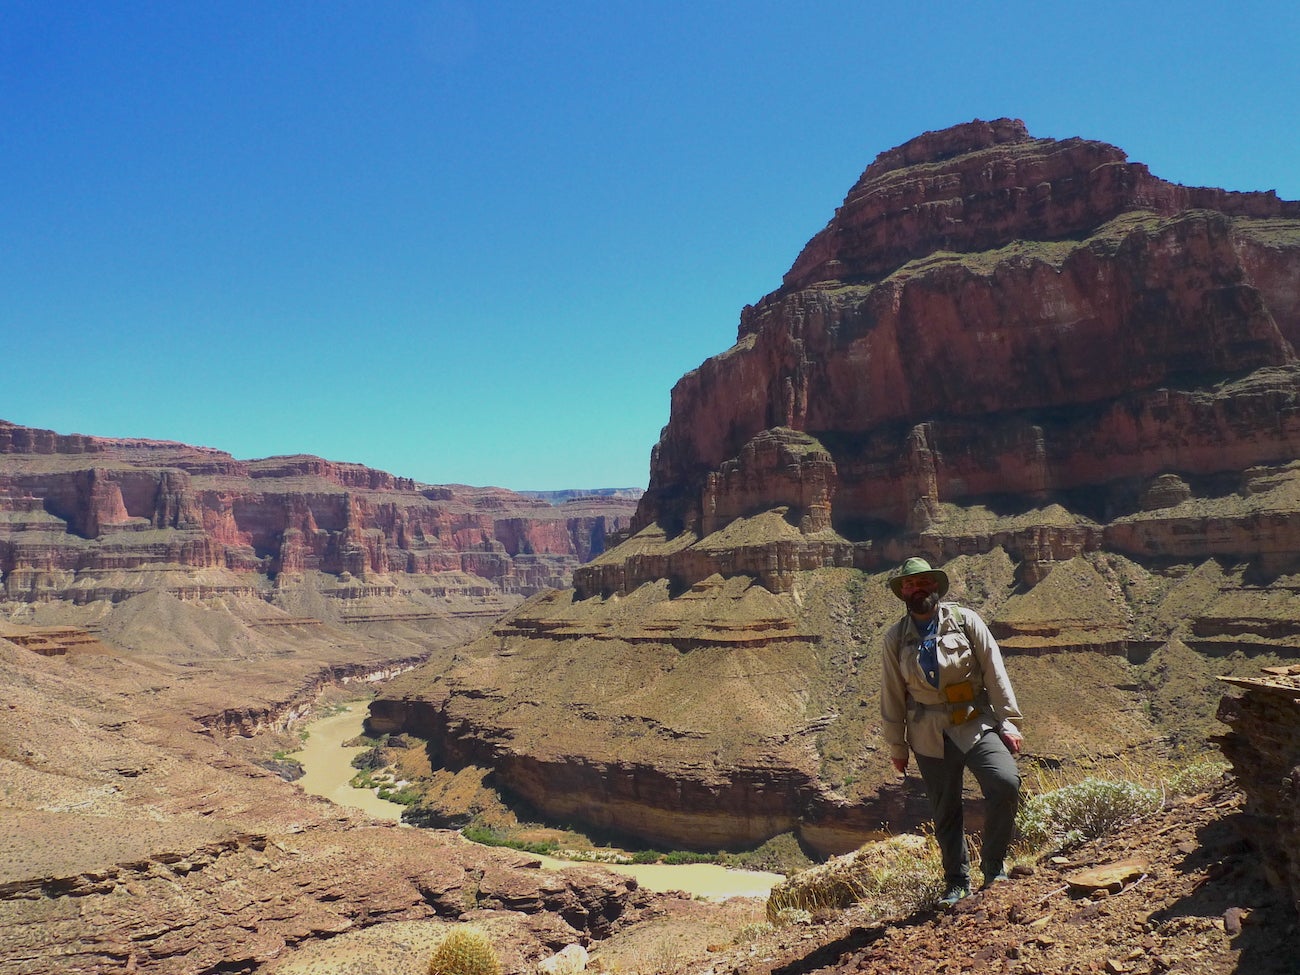 Morh stands with enormous Grand Canyon geologic formation behind him